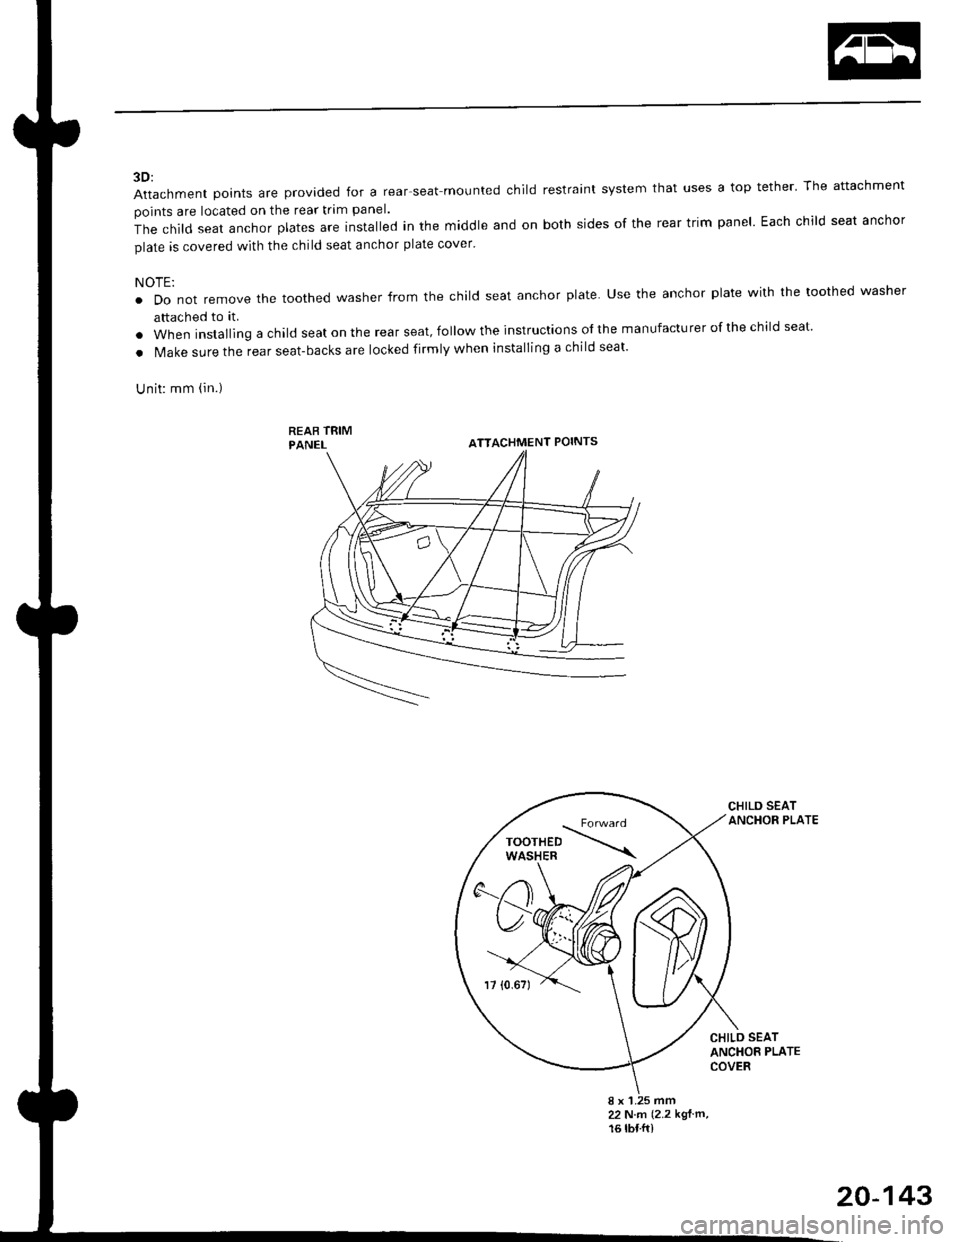 HONDA CIVIC 1997 6.G Workshop Manual 3D:
Attachment points are provided for a rear-seat mounted child restraint system that uses a top tether The attachment
points are located on the rear trim panel.
The child seat anchor plates are rns